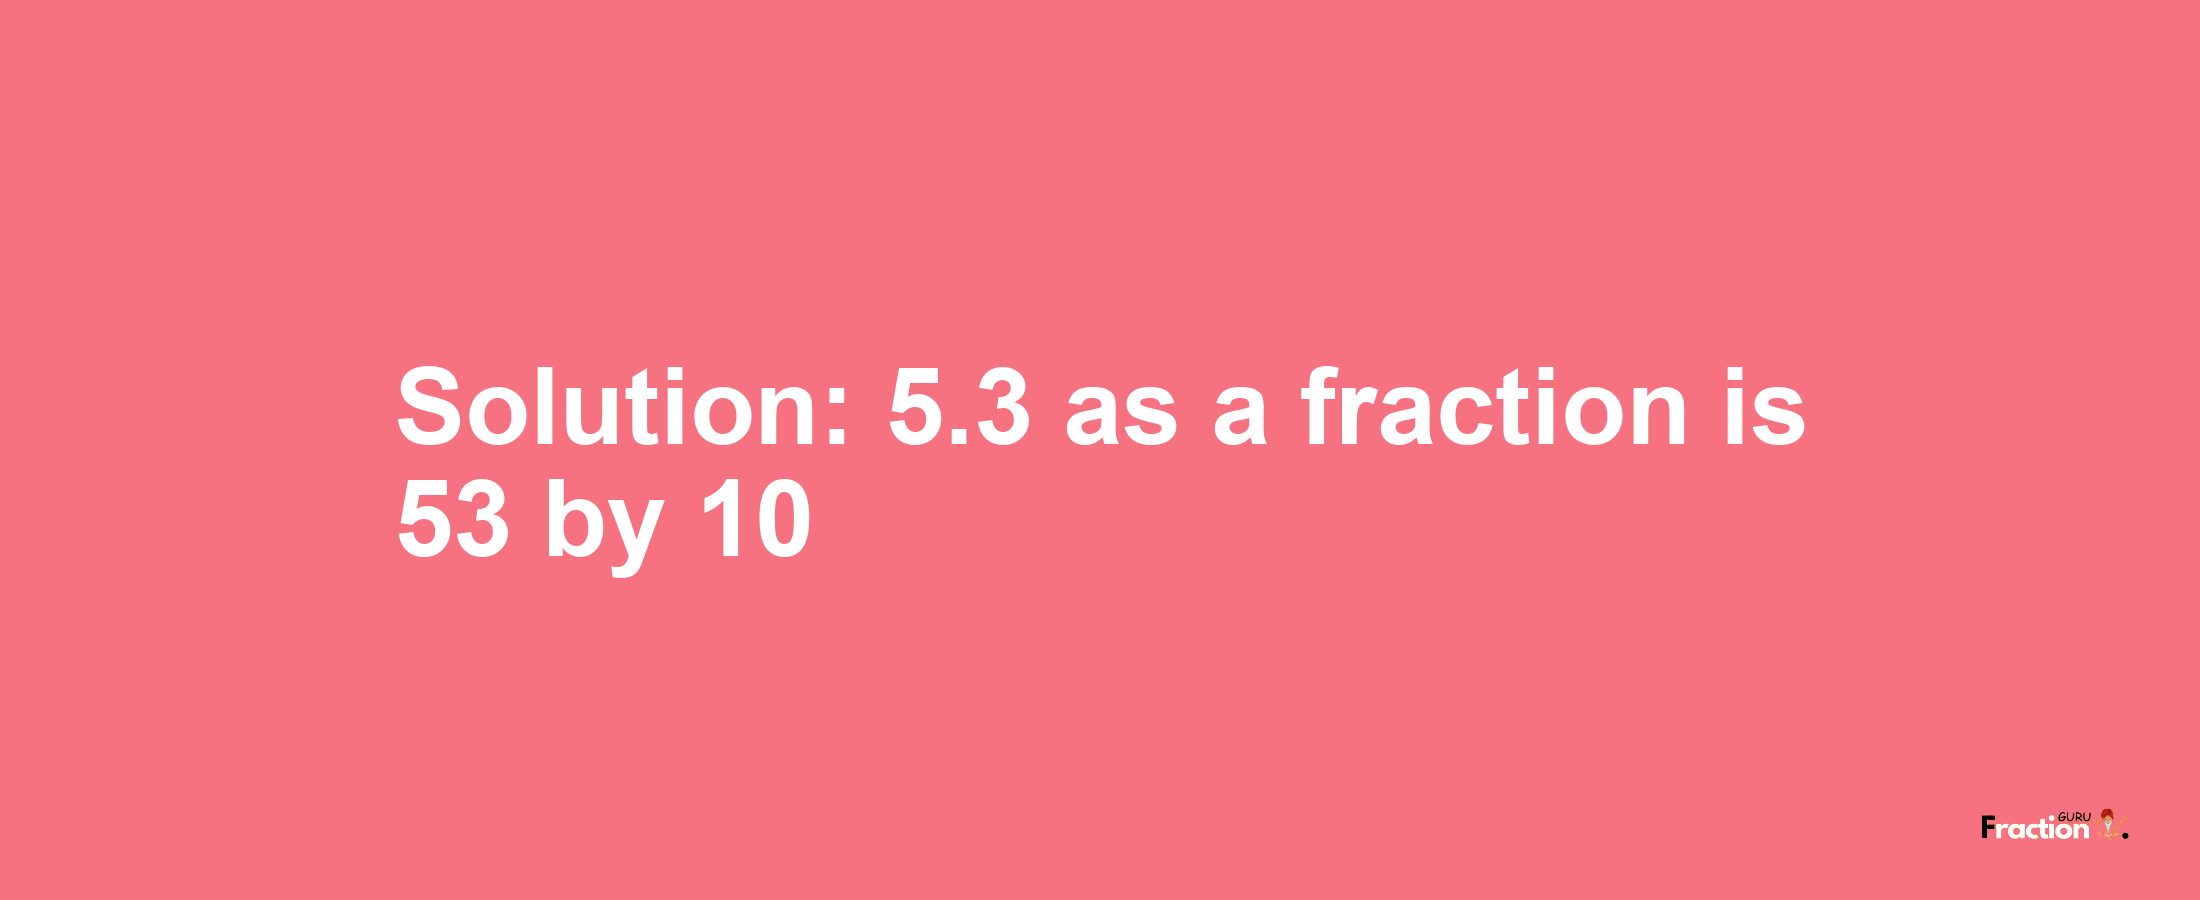 Solution:5.3 as a fraction is 53/10